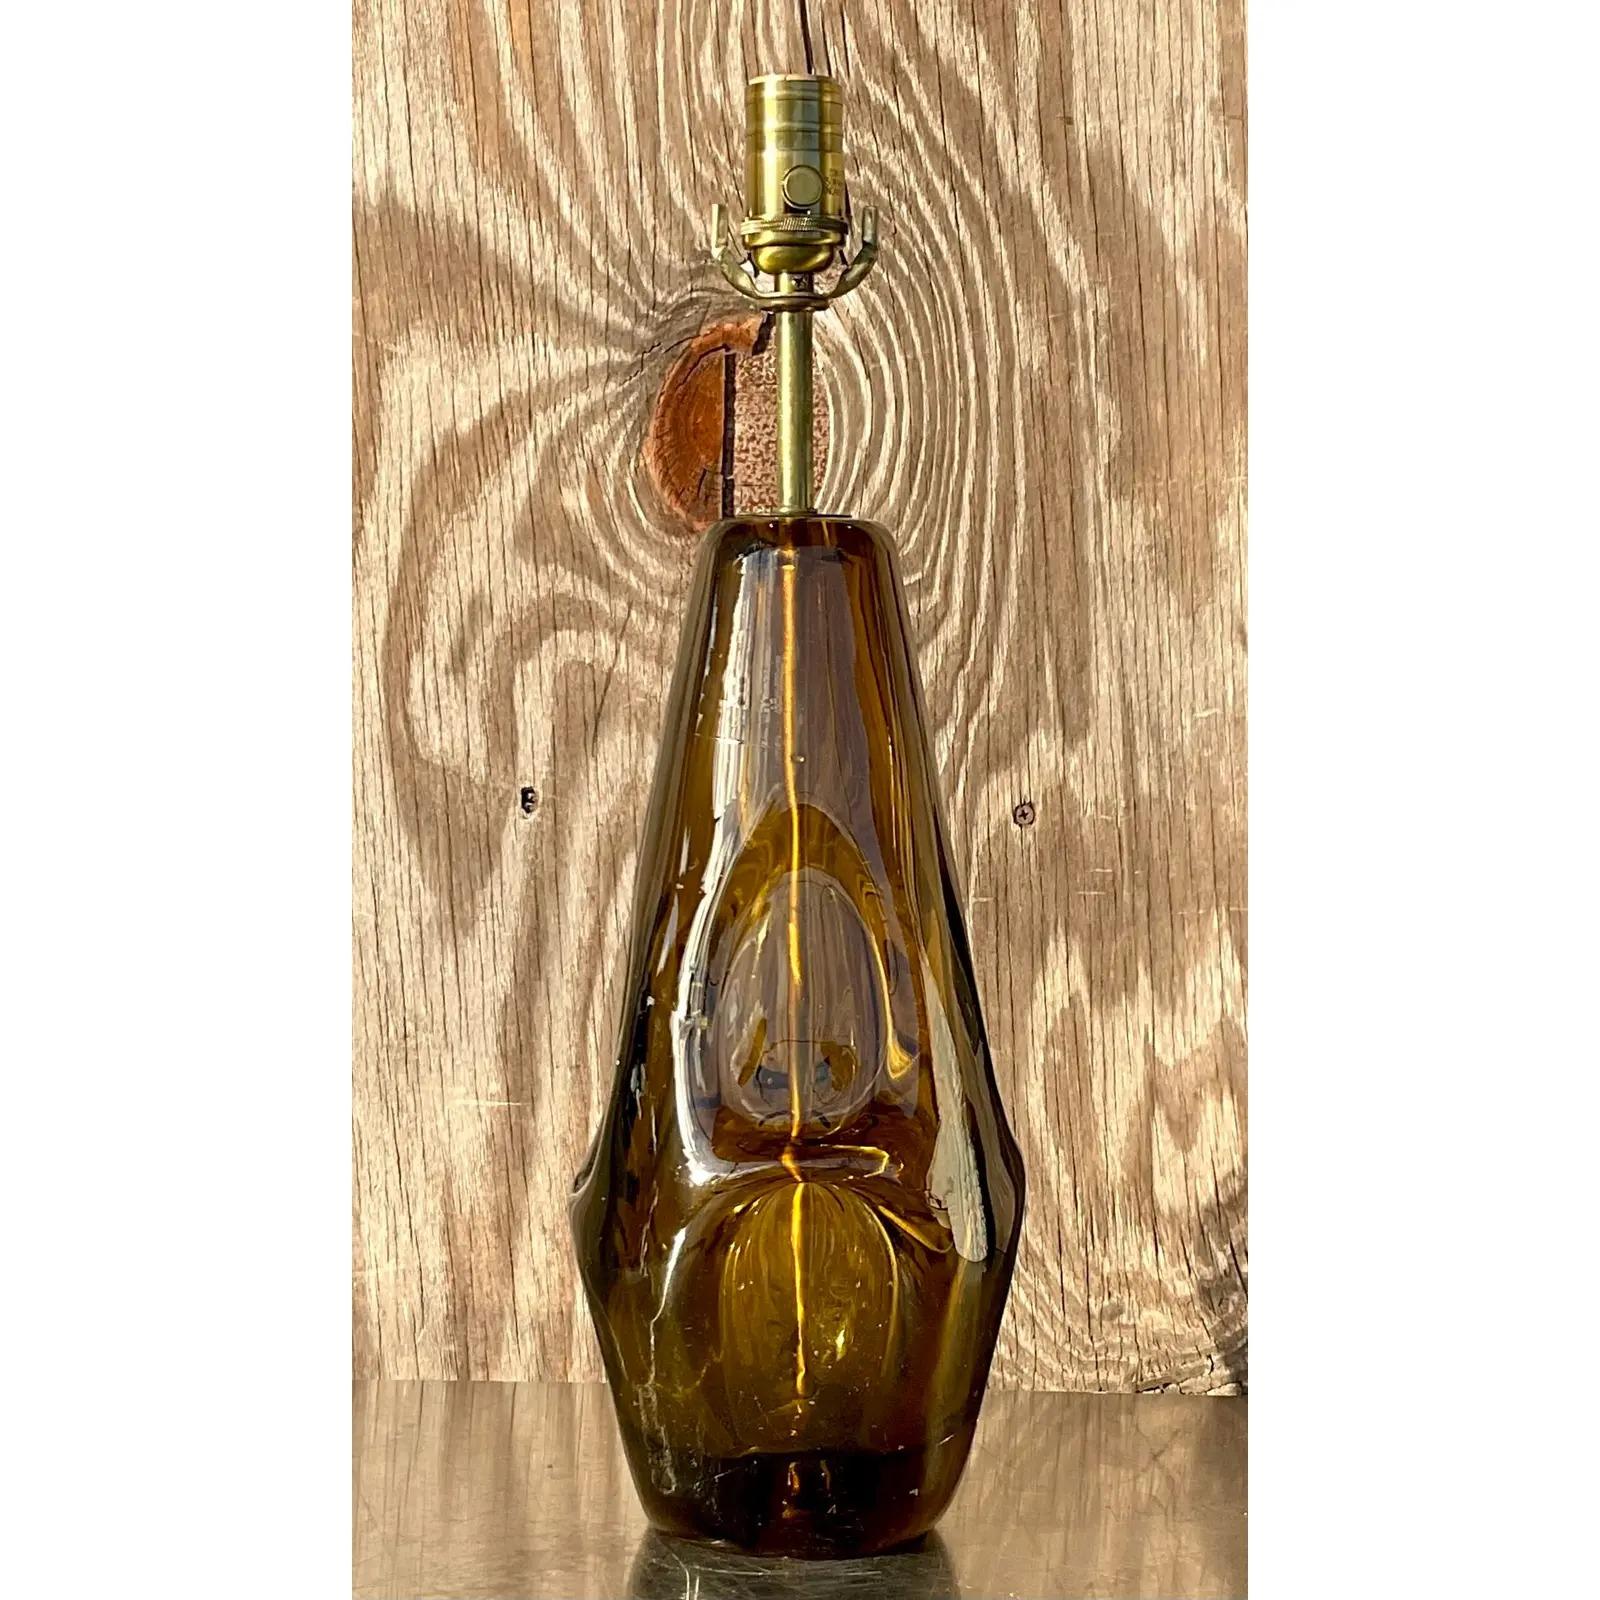 A fabulous vintage Boho table lamp. Beautiful blown glass in a deep Smokey golden brown color. Brushed brass hardware. Acquired from a Palm Beach estate.

The lamp is in great vintage condition. Minor scuffs and blemishes appropriate to its age and